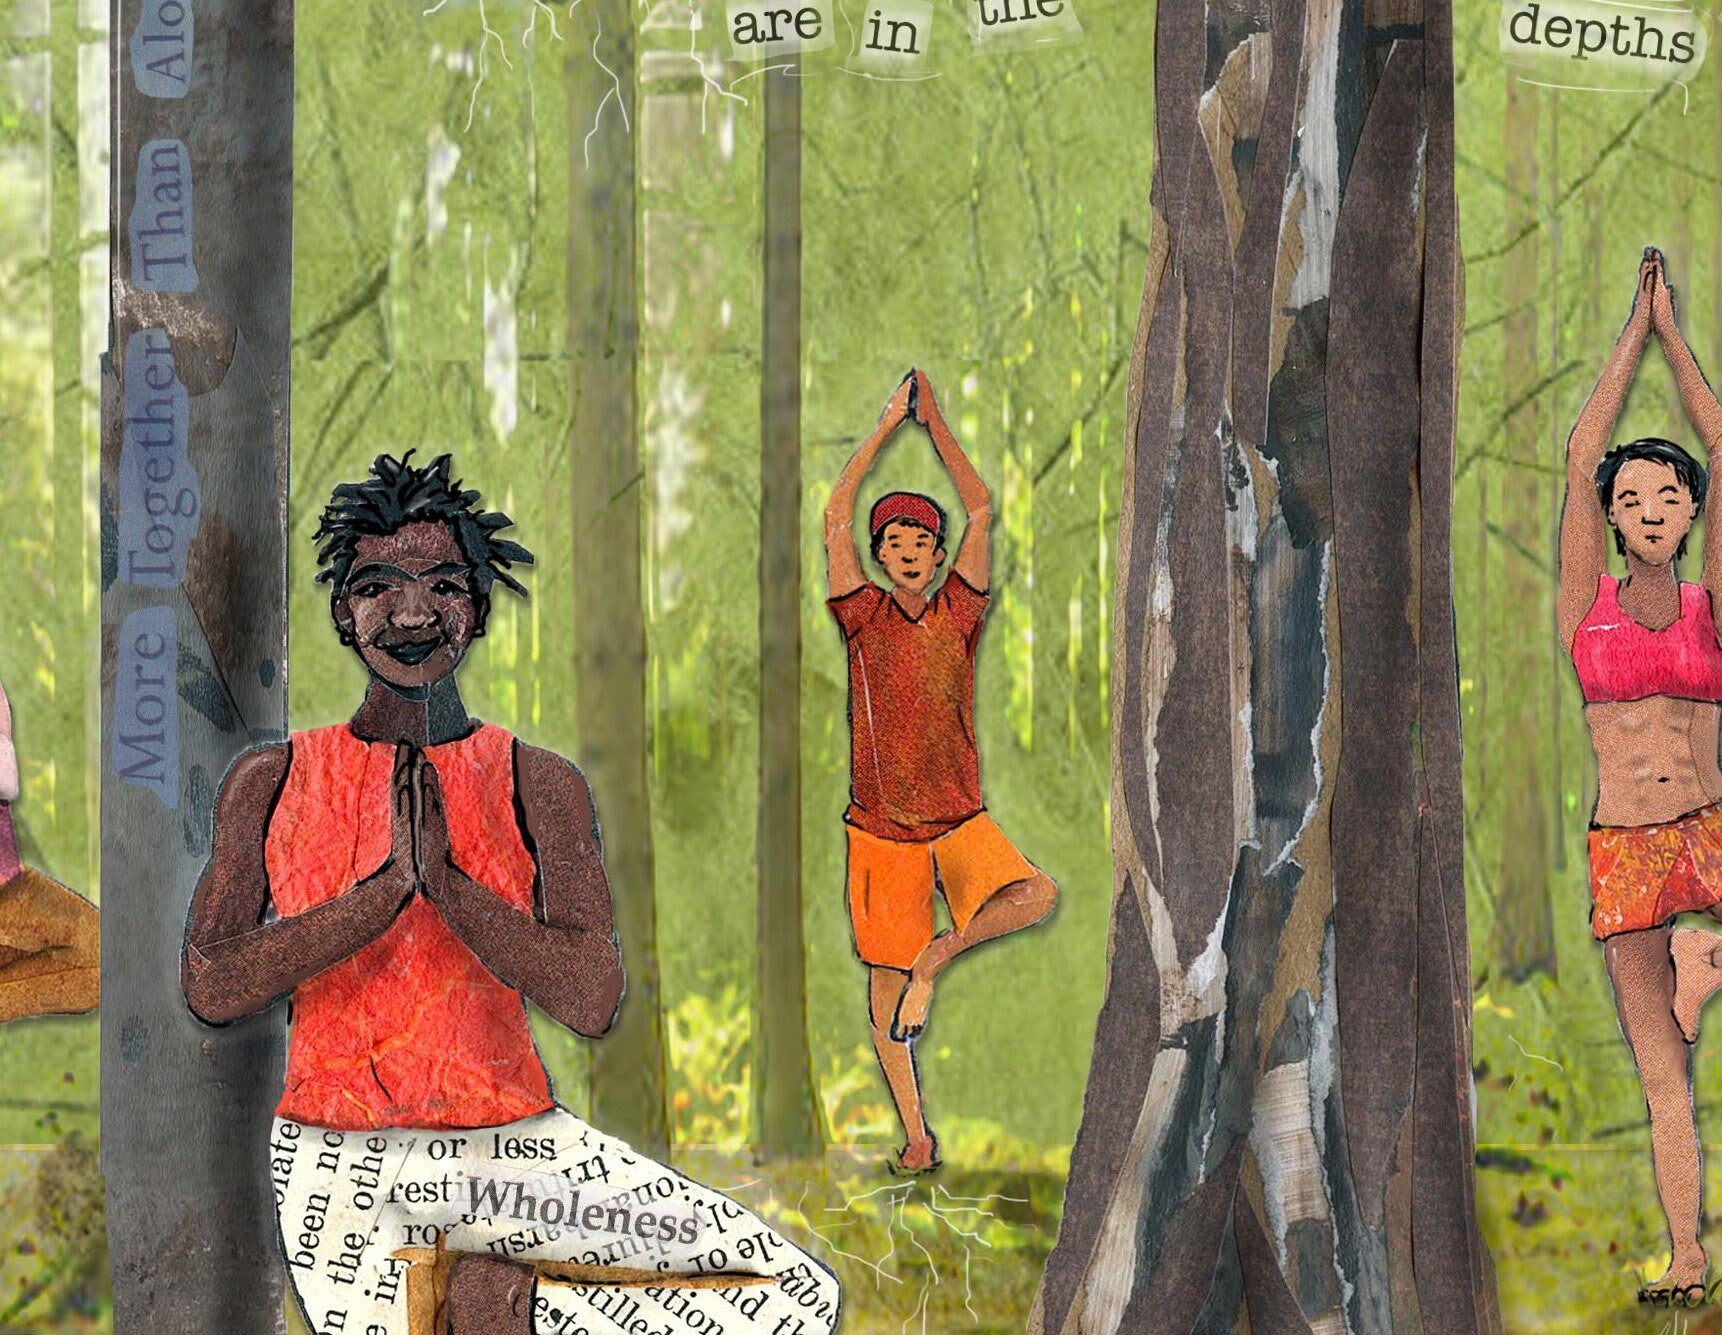 Greeting Card of mixed media collage of people doing tree pose, yoga in the forest, diversity, rooted, connection to nature - Blank Inside